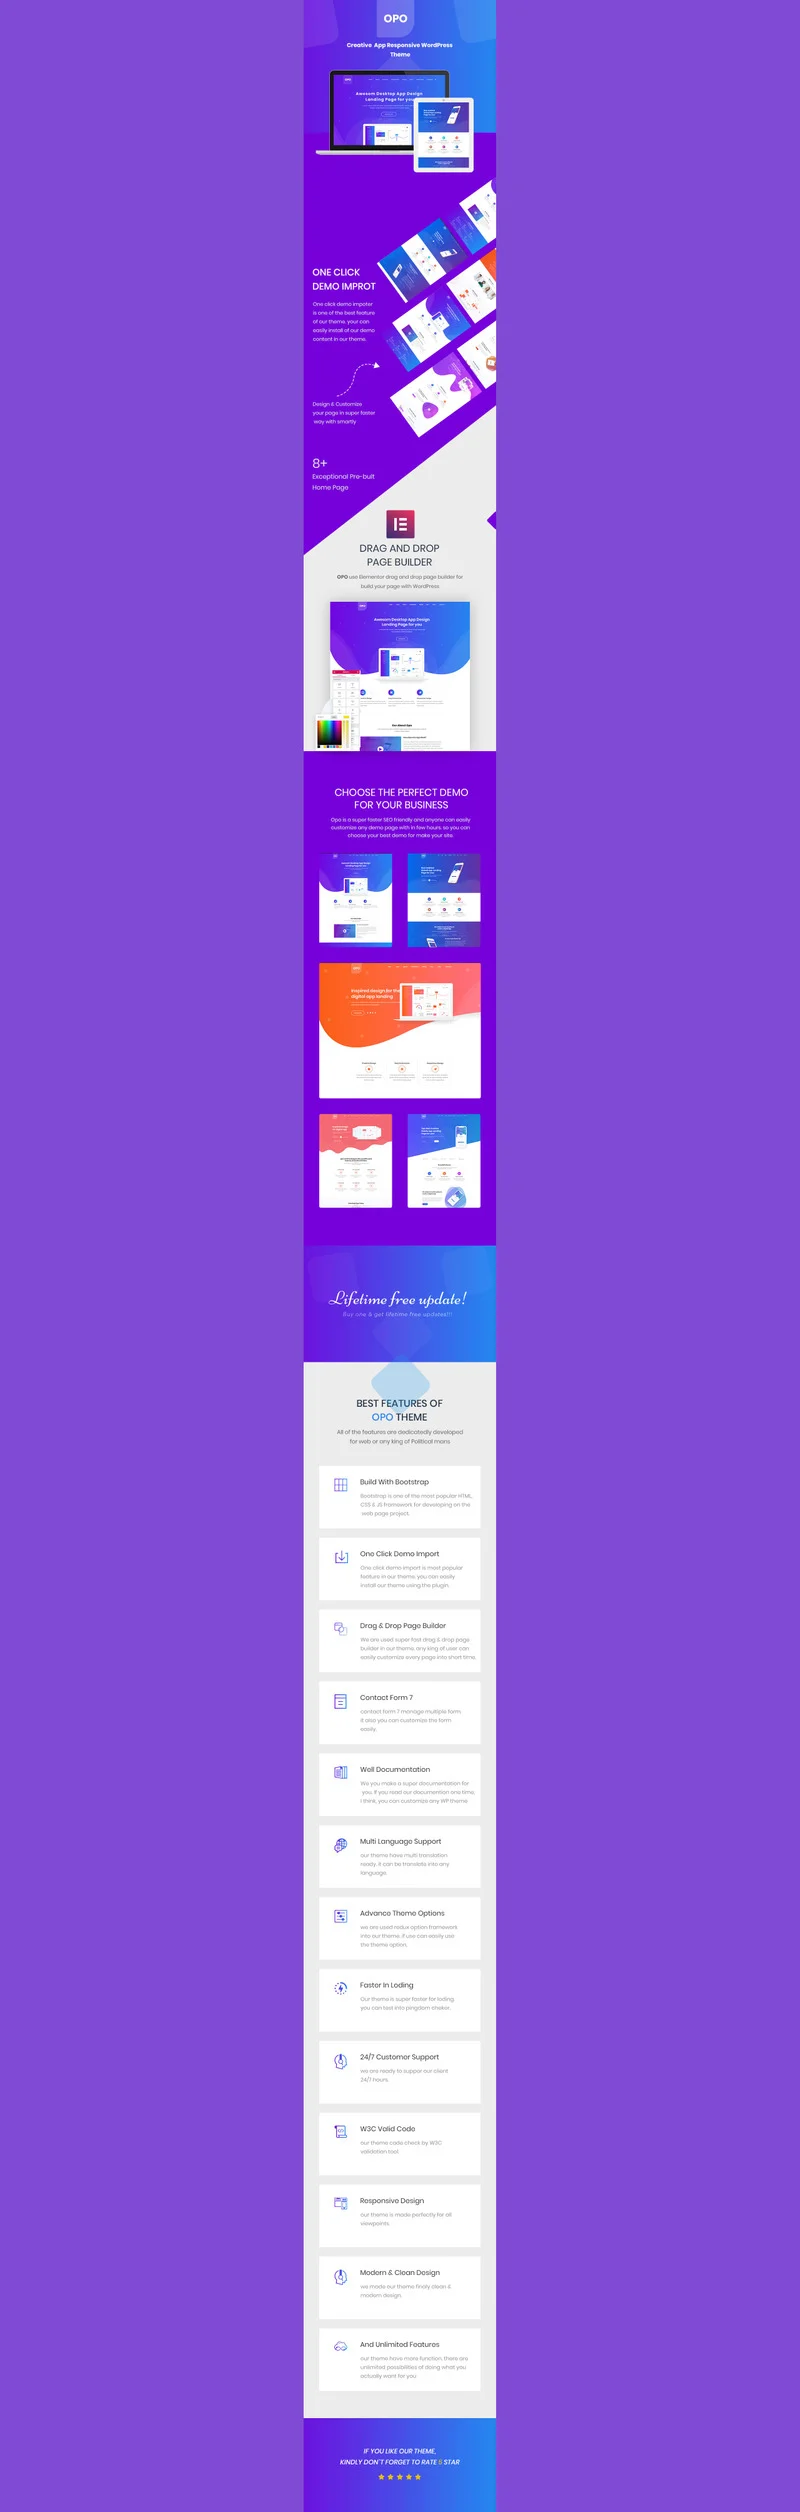 A lot of different pages of opo creative app, software, web app and startup tech company on a purple background.